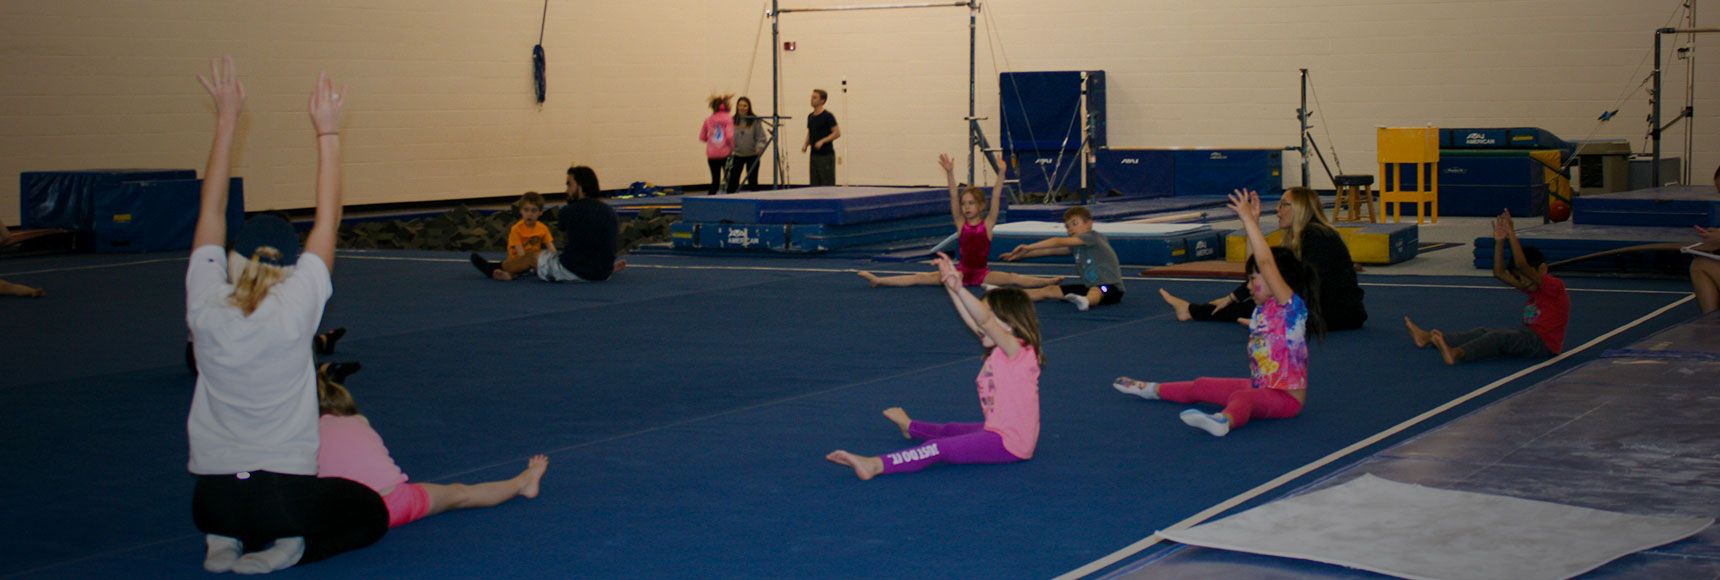 Students stretching for gymnastics class